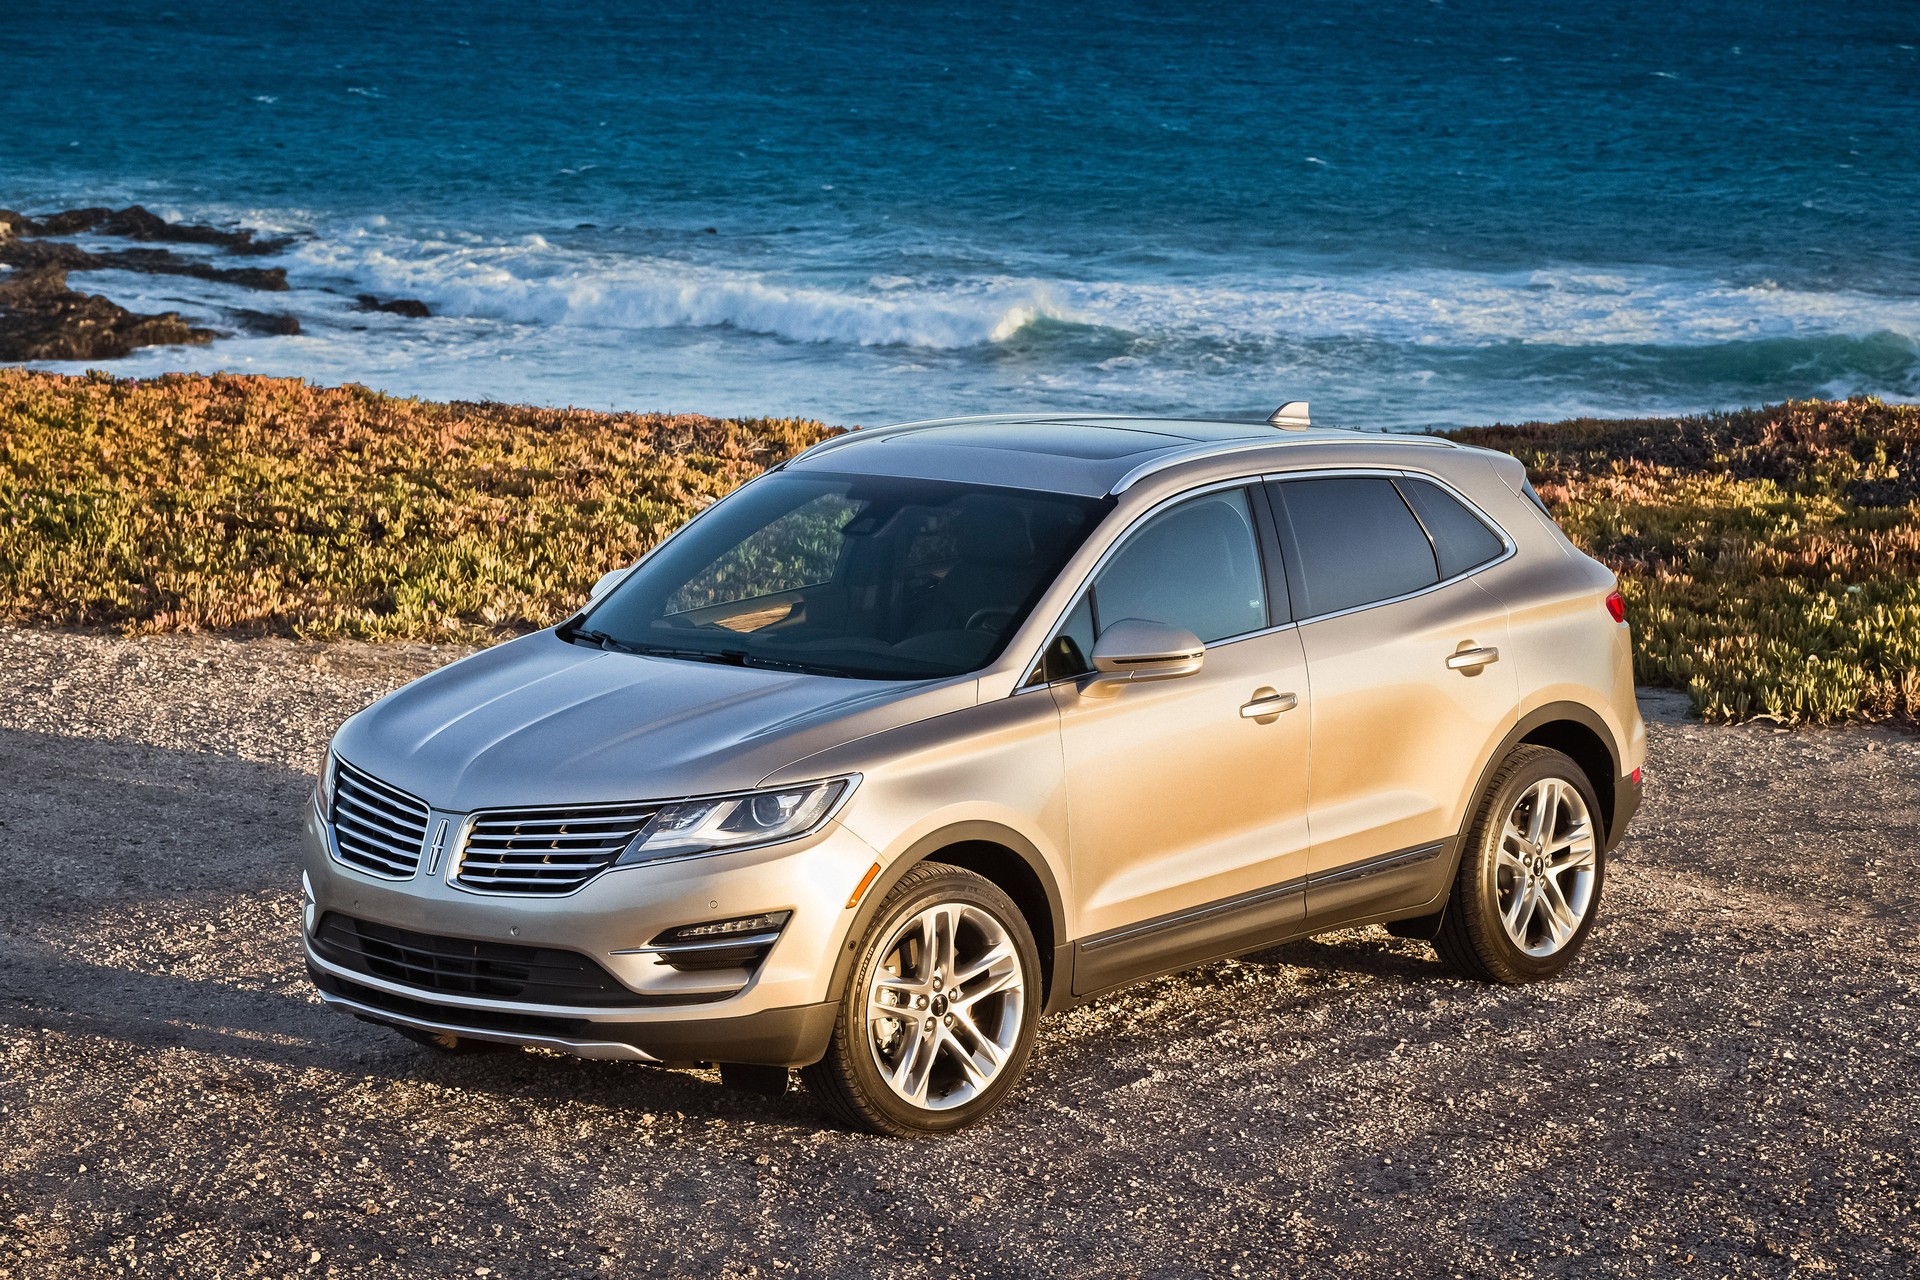 2015 Lincoln MKC first drive review